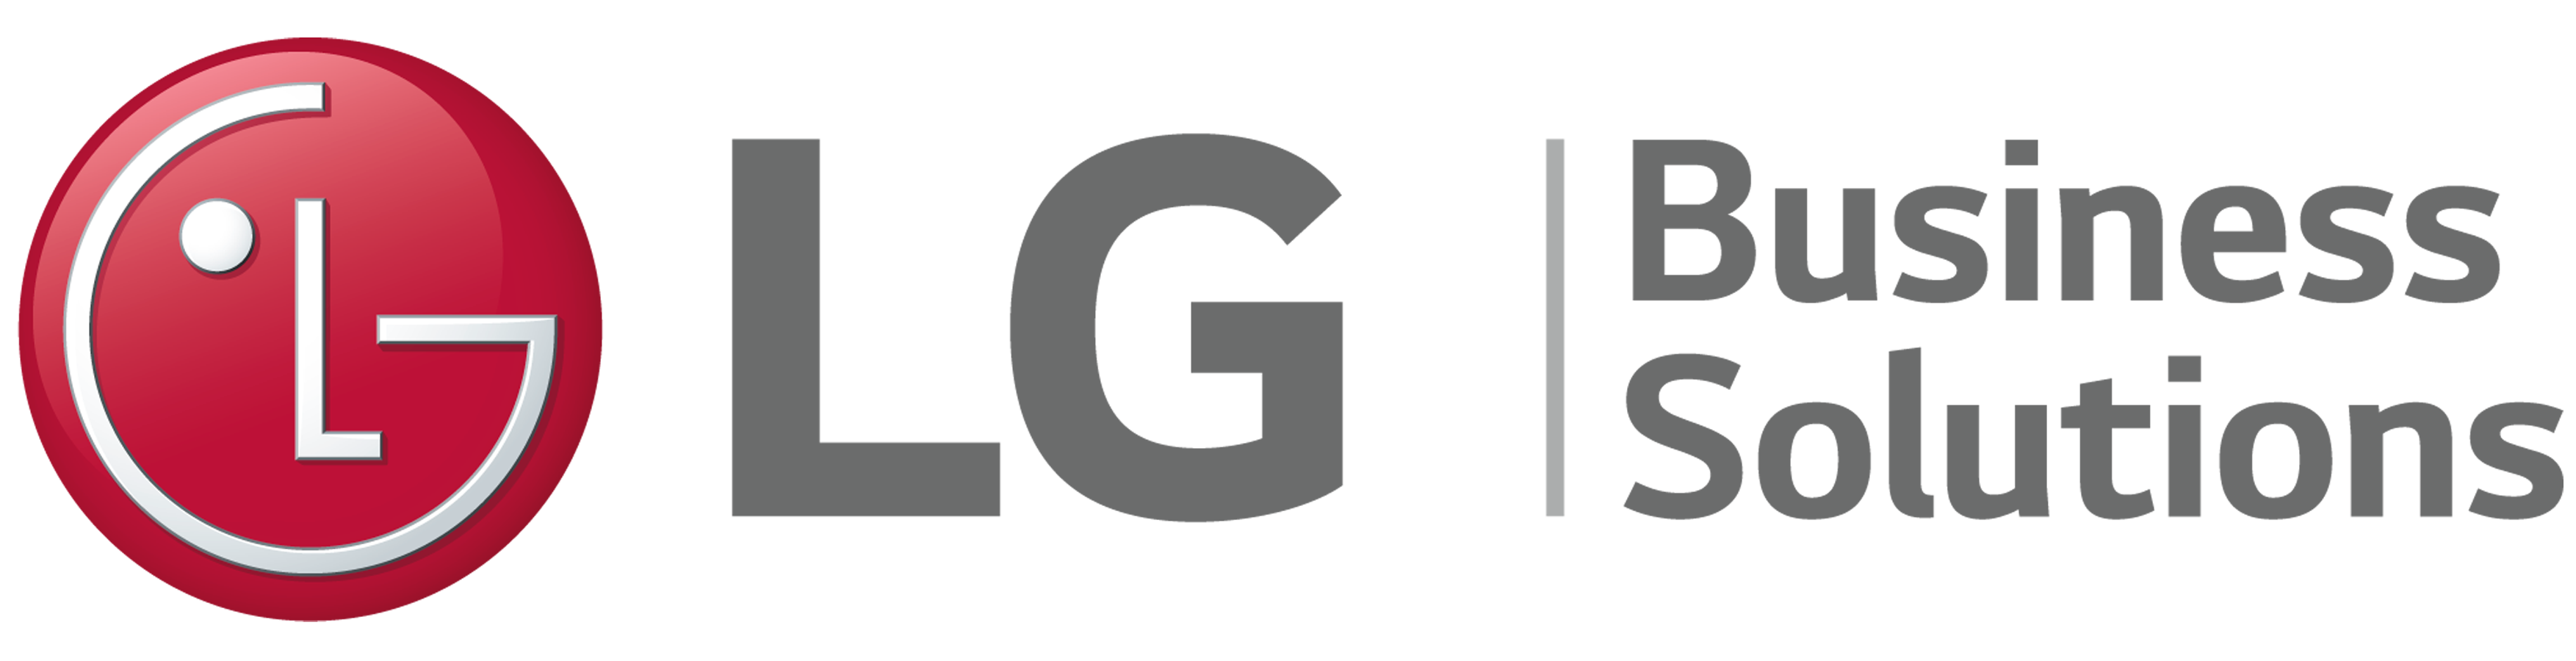 LOGO-LG Business Solutions.png